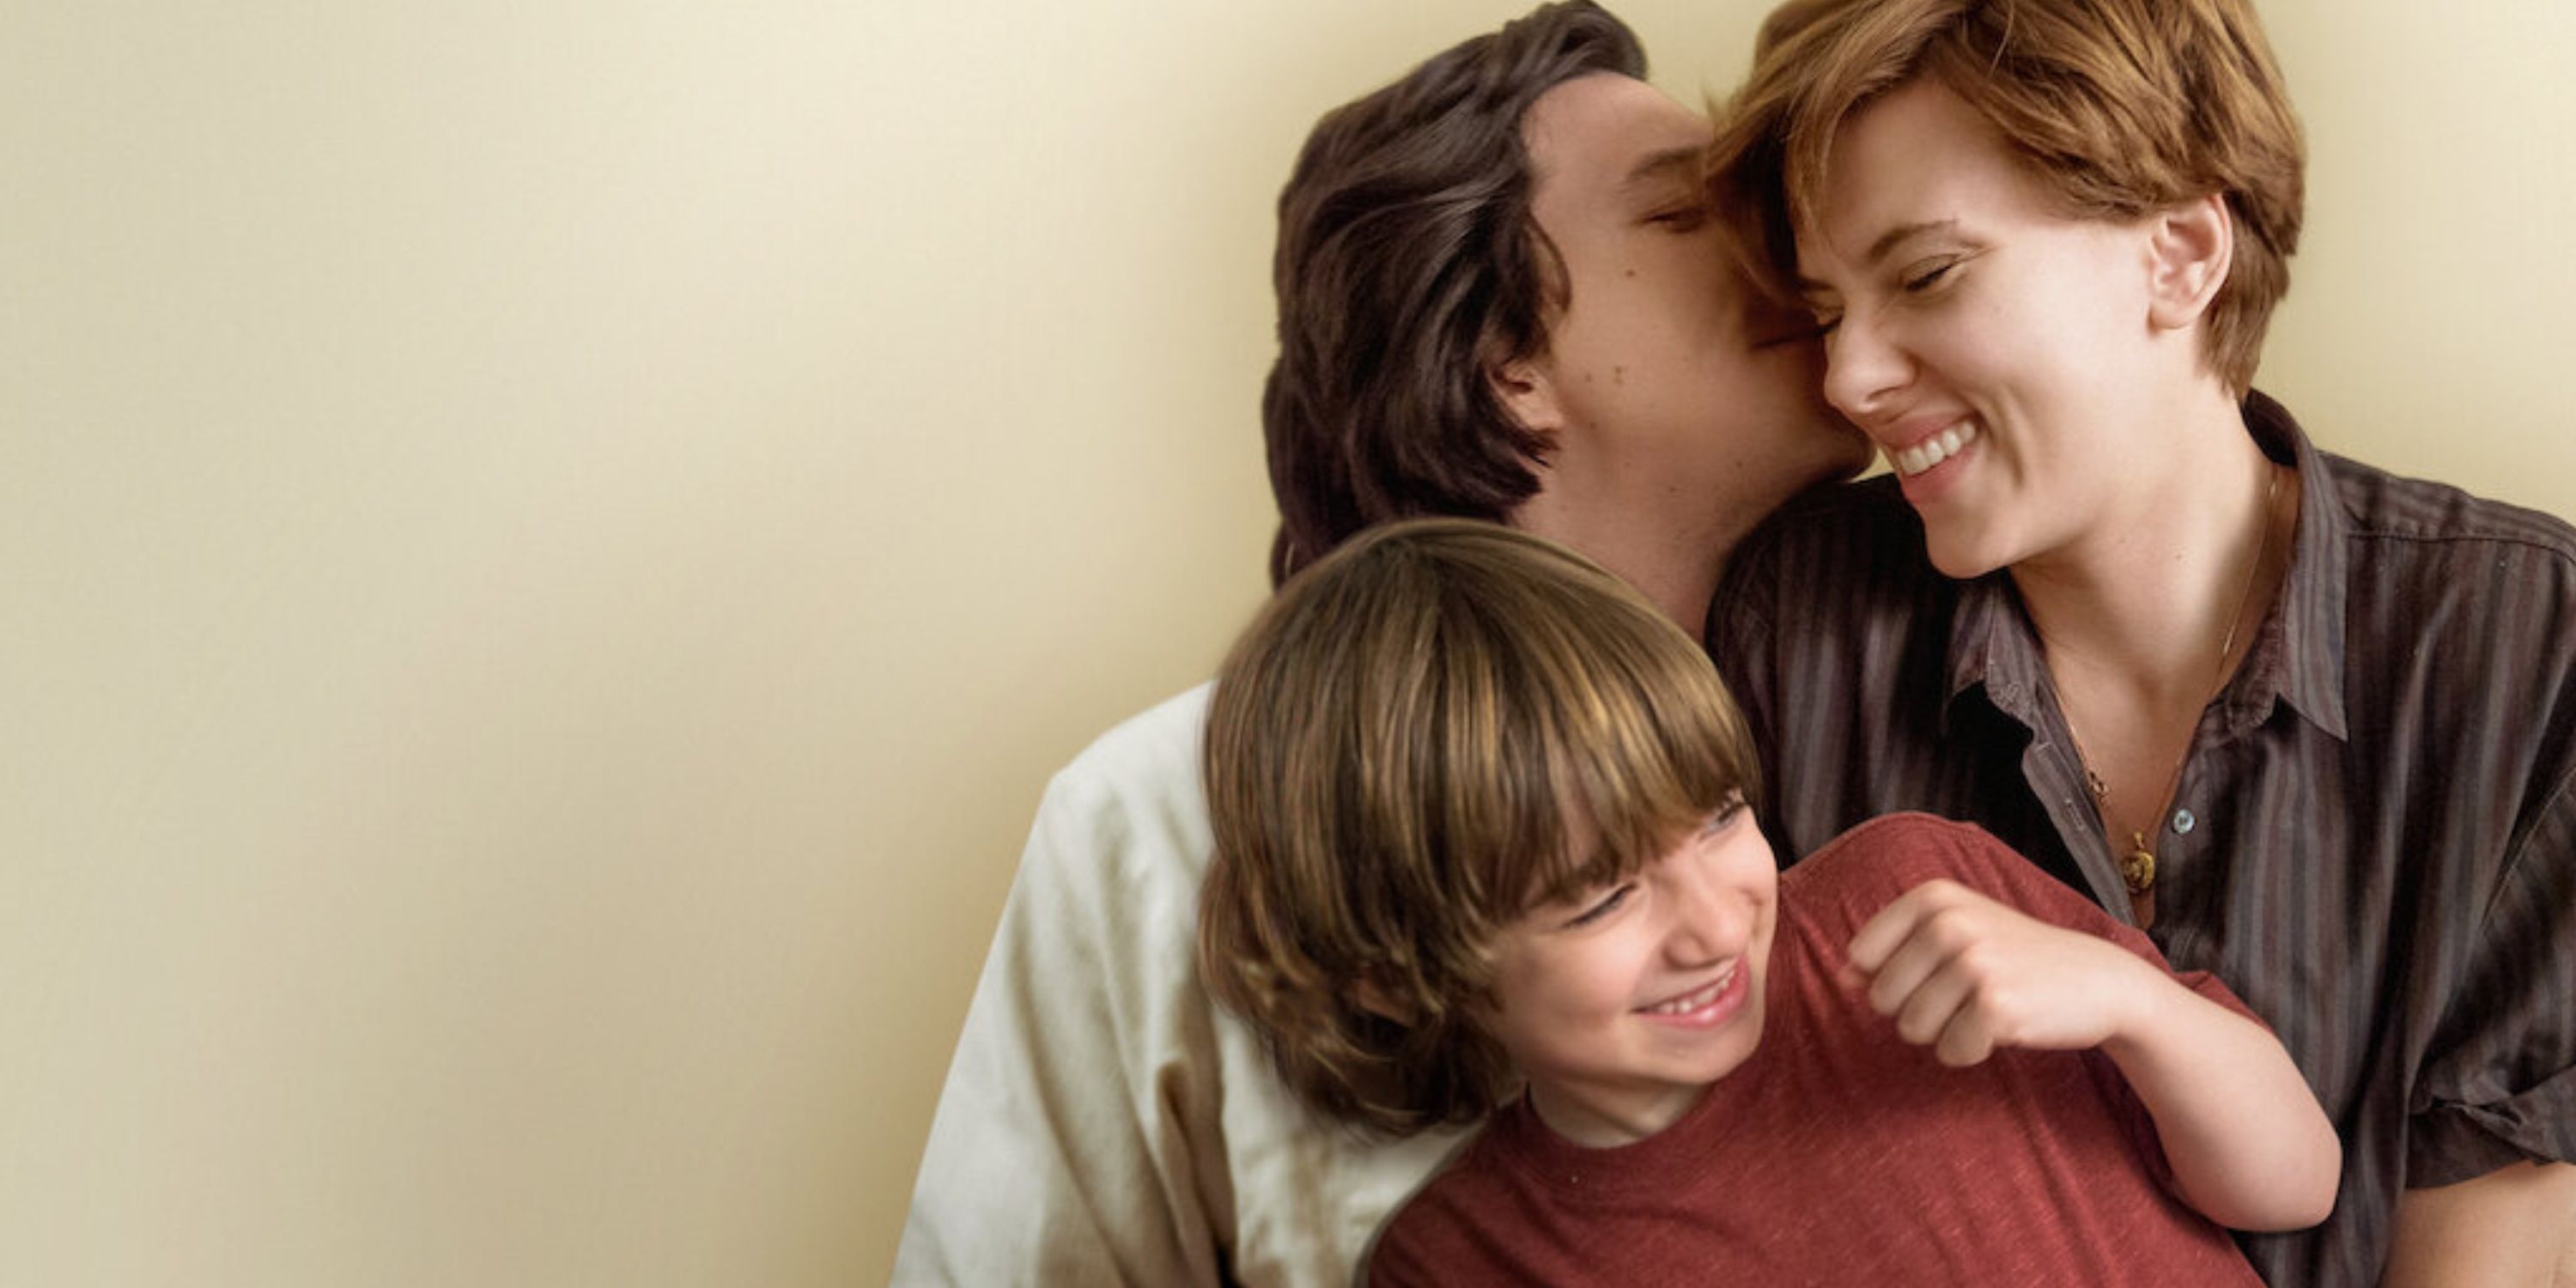 Adam Driver as Charlie Barber, kissing Scarlett Johansson as Nicole Barber, while the two are holding Azhy Robertson as Henry Barber, their son. They are infront of a beige wall.